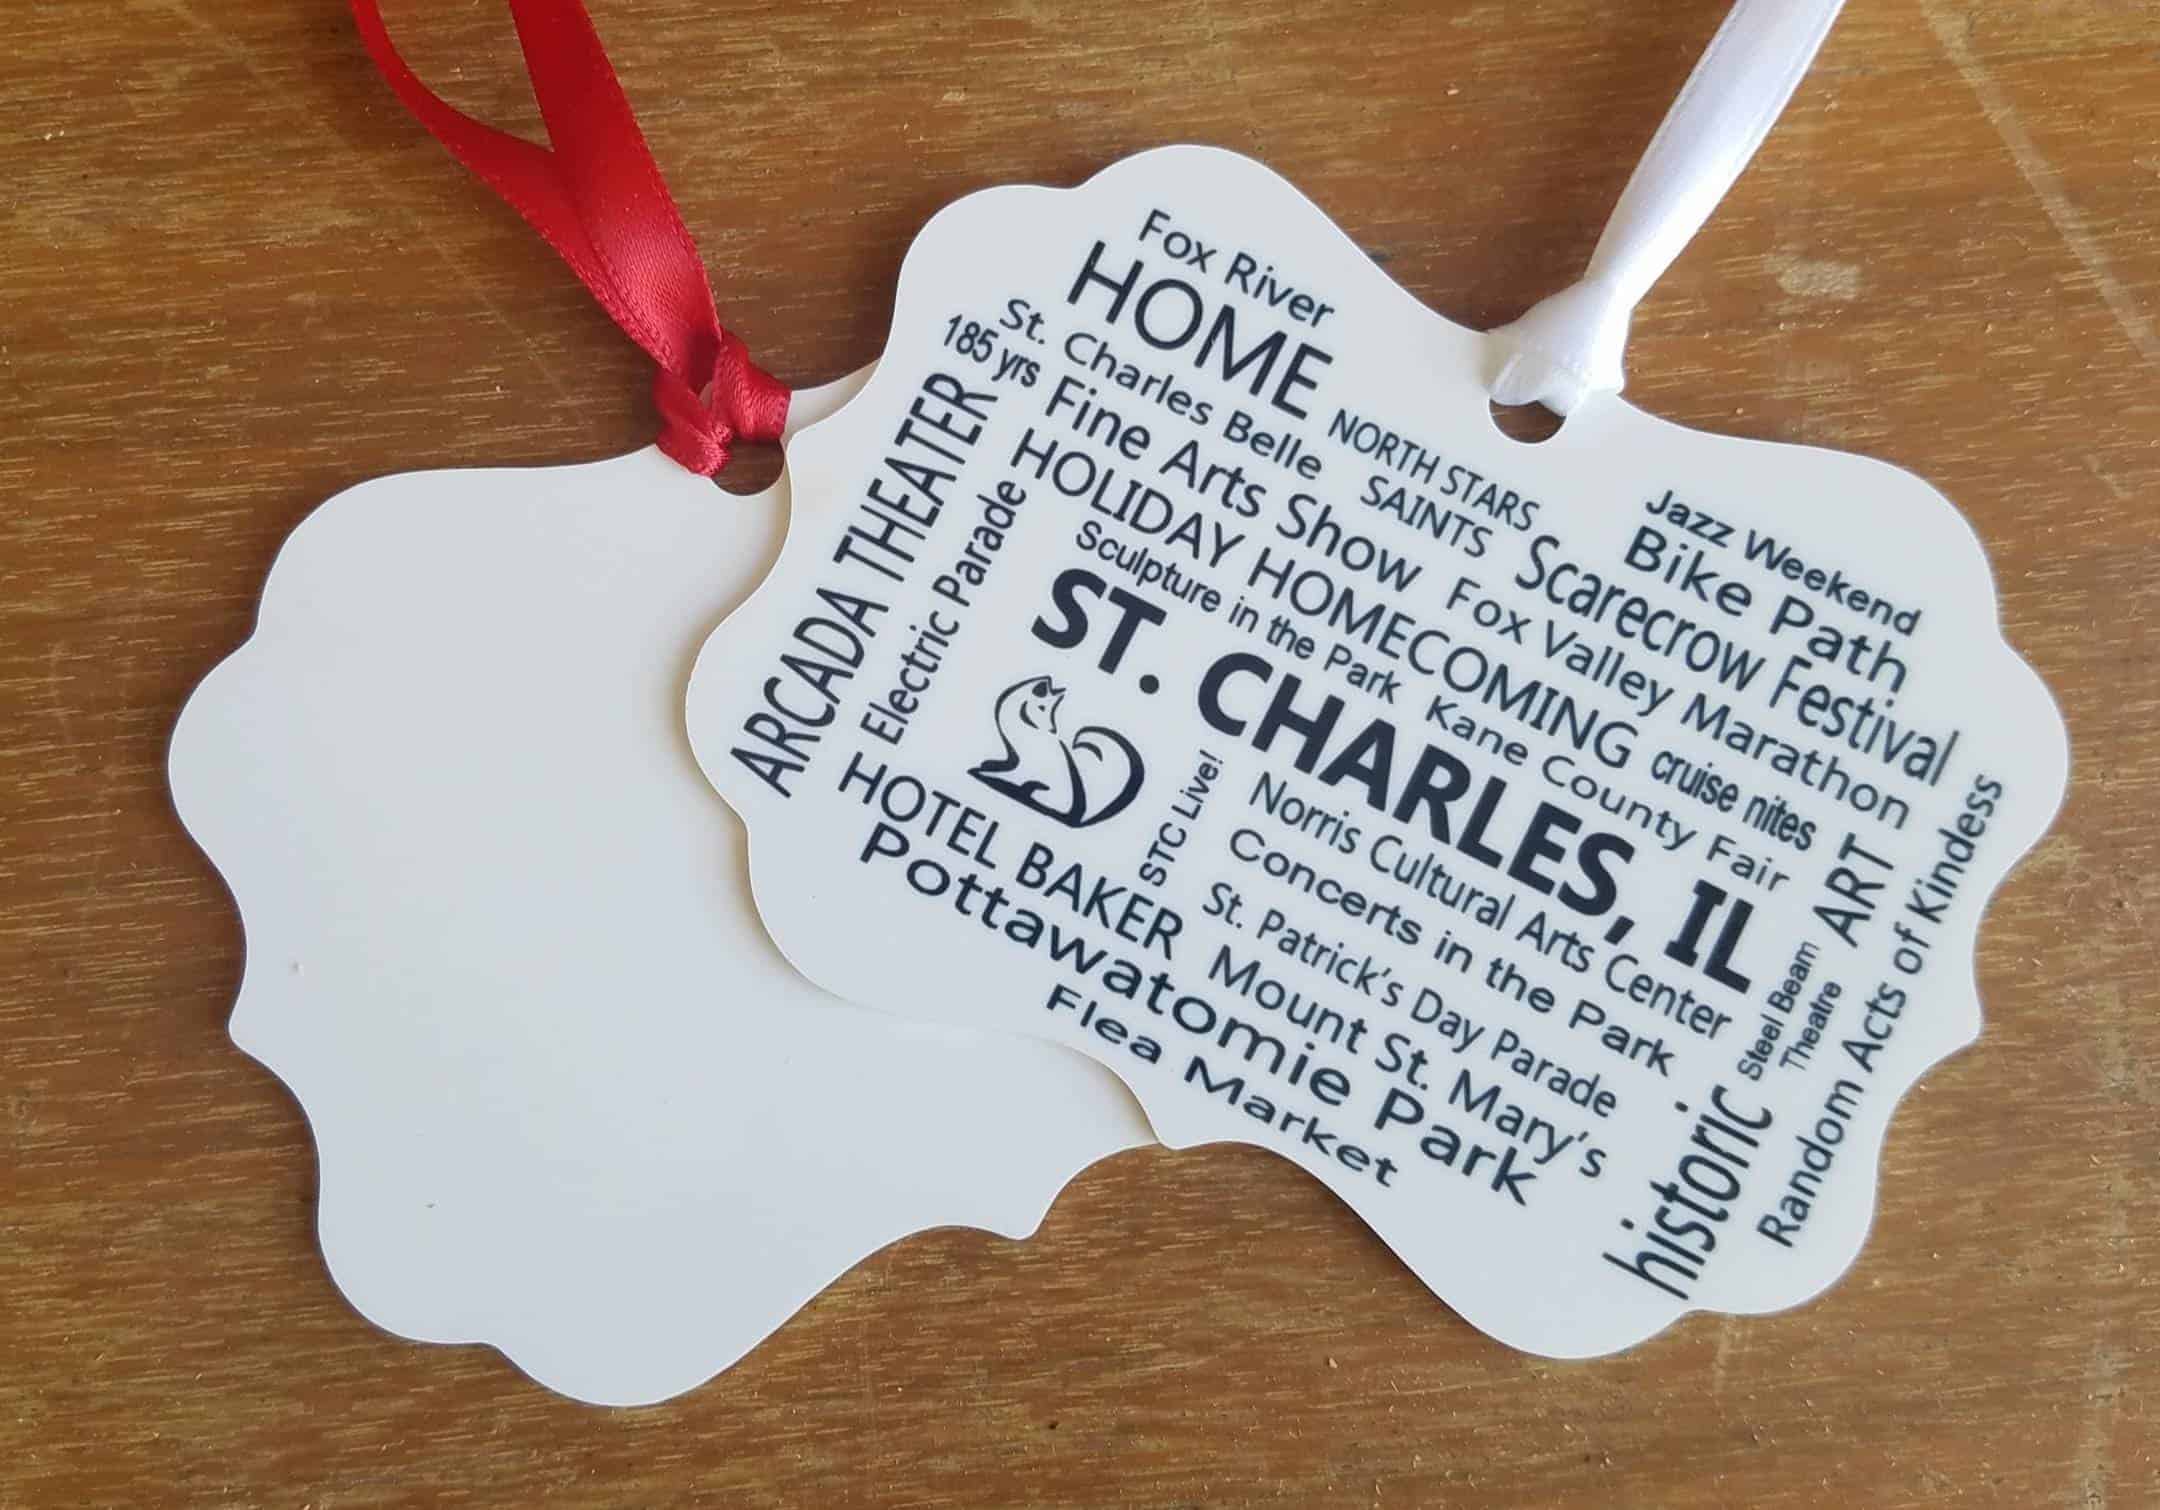 This St. Charles Ornament is made with love by Studio Patty D! Shop more unique gift ideas today with Spots Initiatives, the best way to support creators.